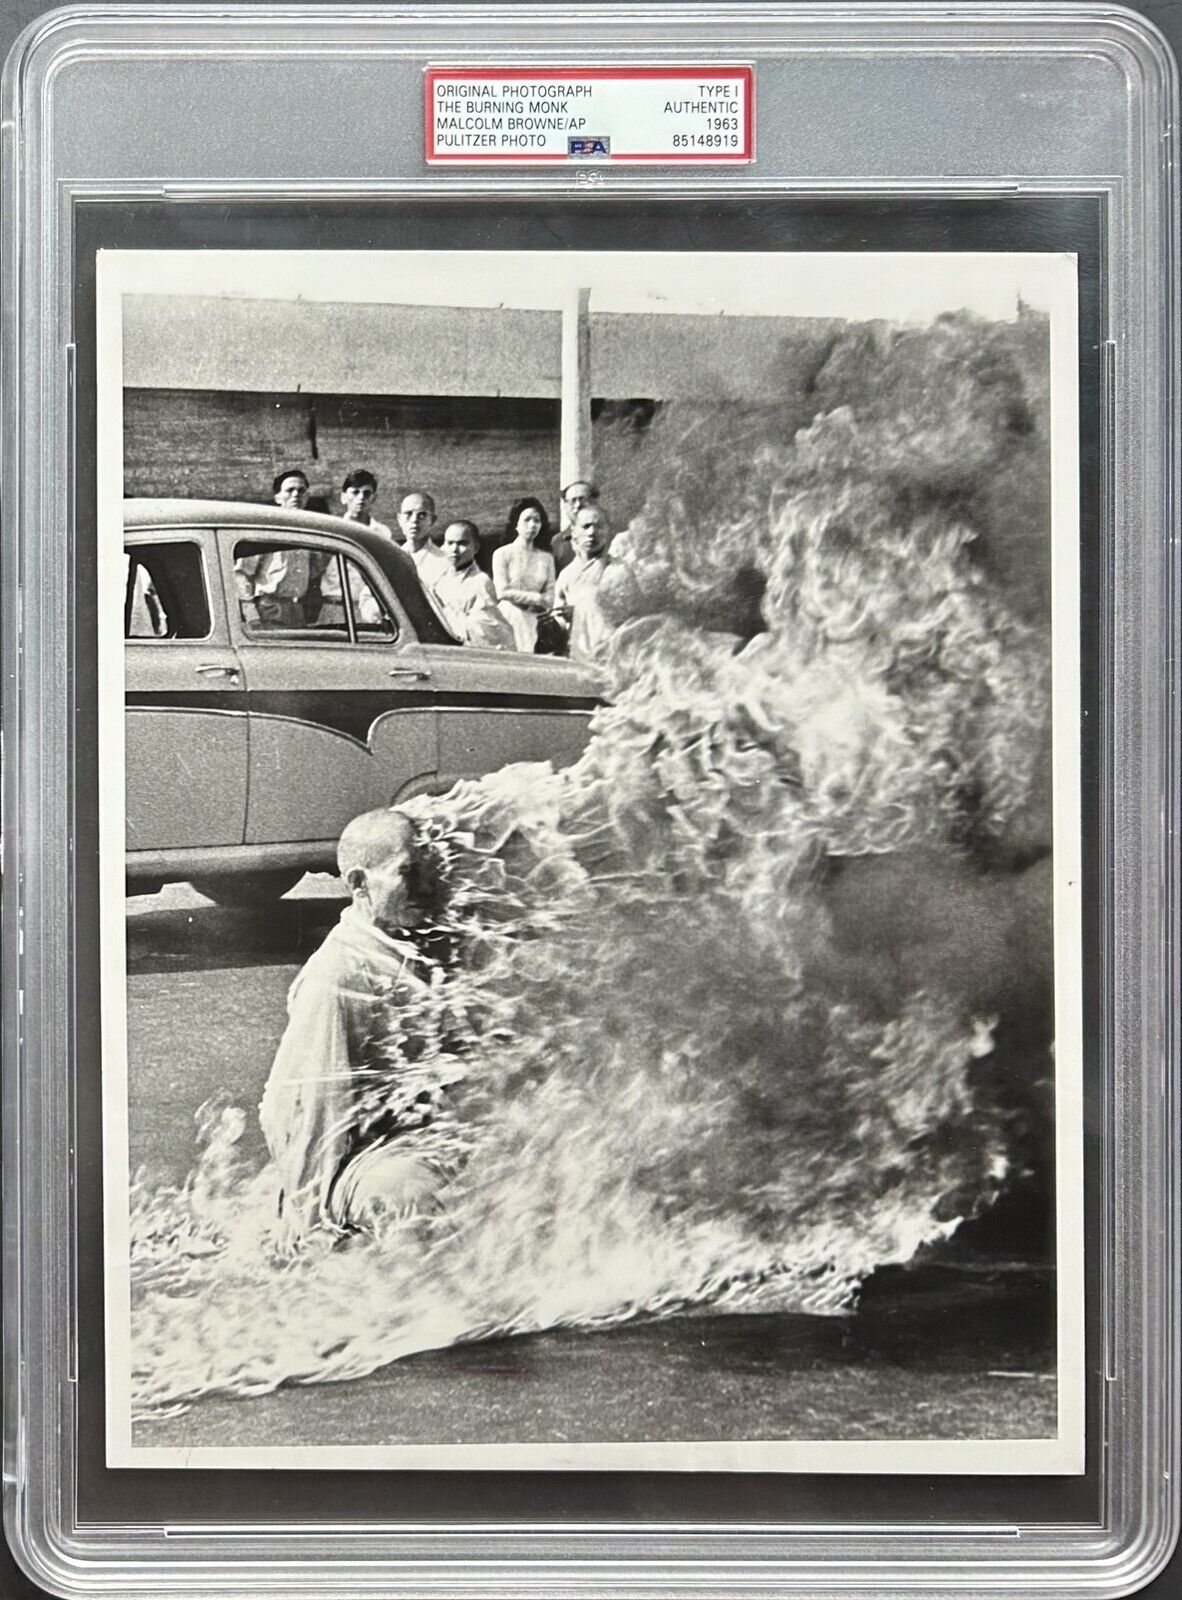 The Burning Monk 1963 Pulitzer Prize ICONIC Type 1 Original Photo By M. Browne